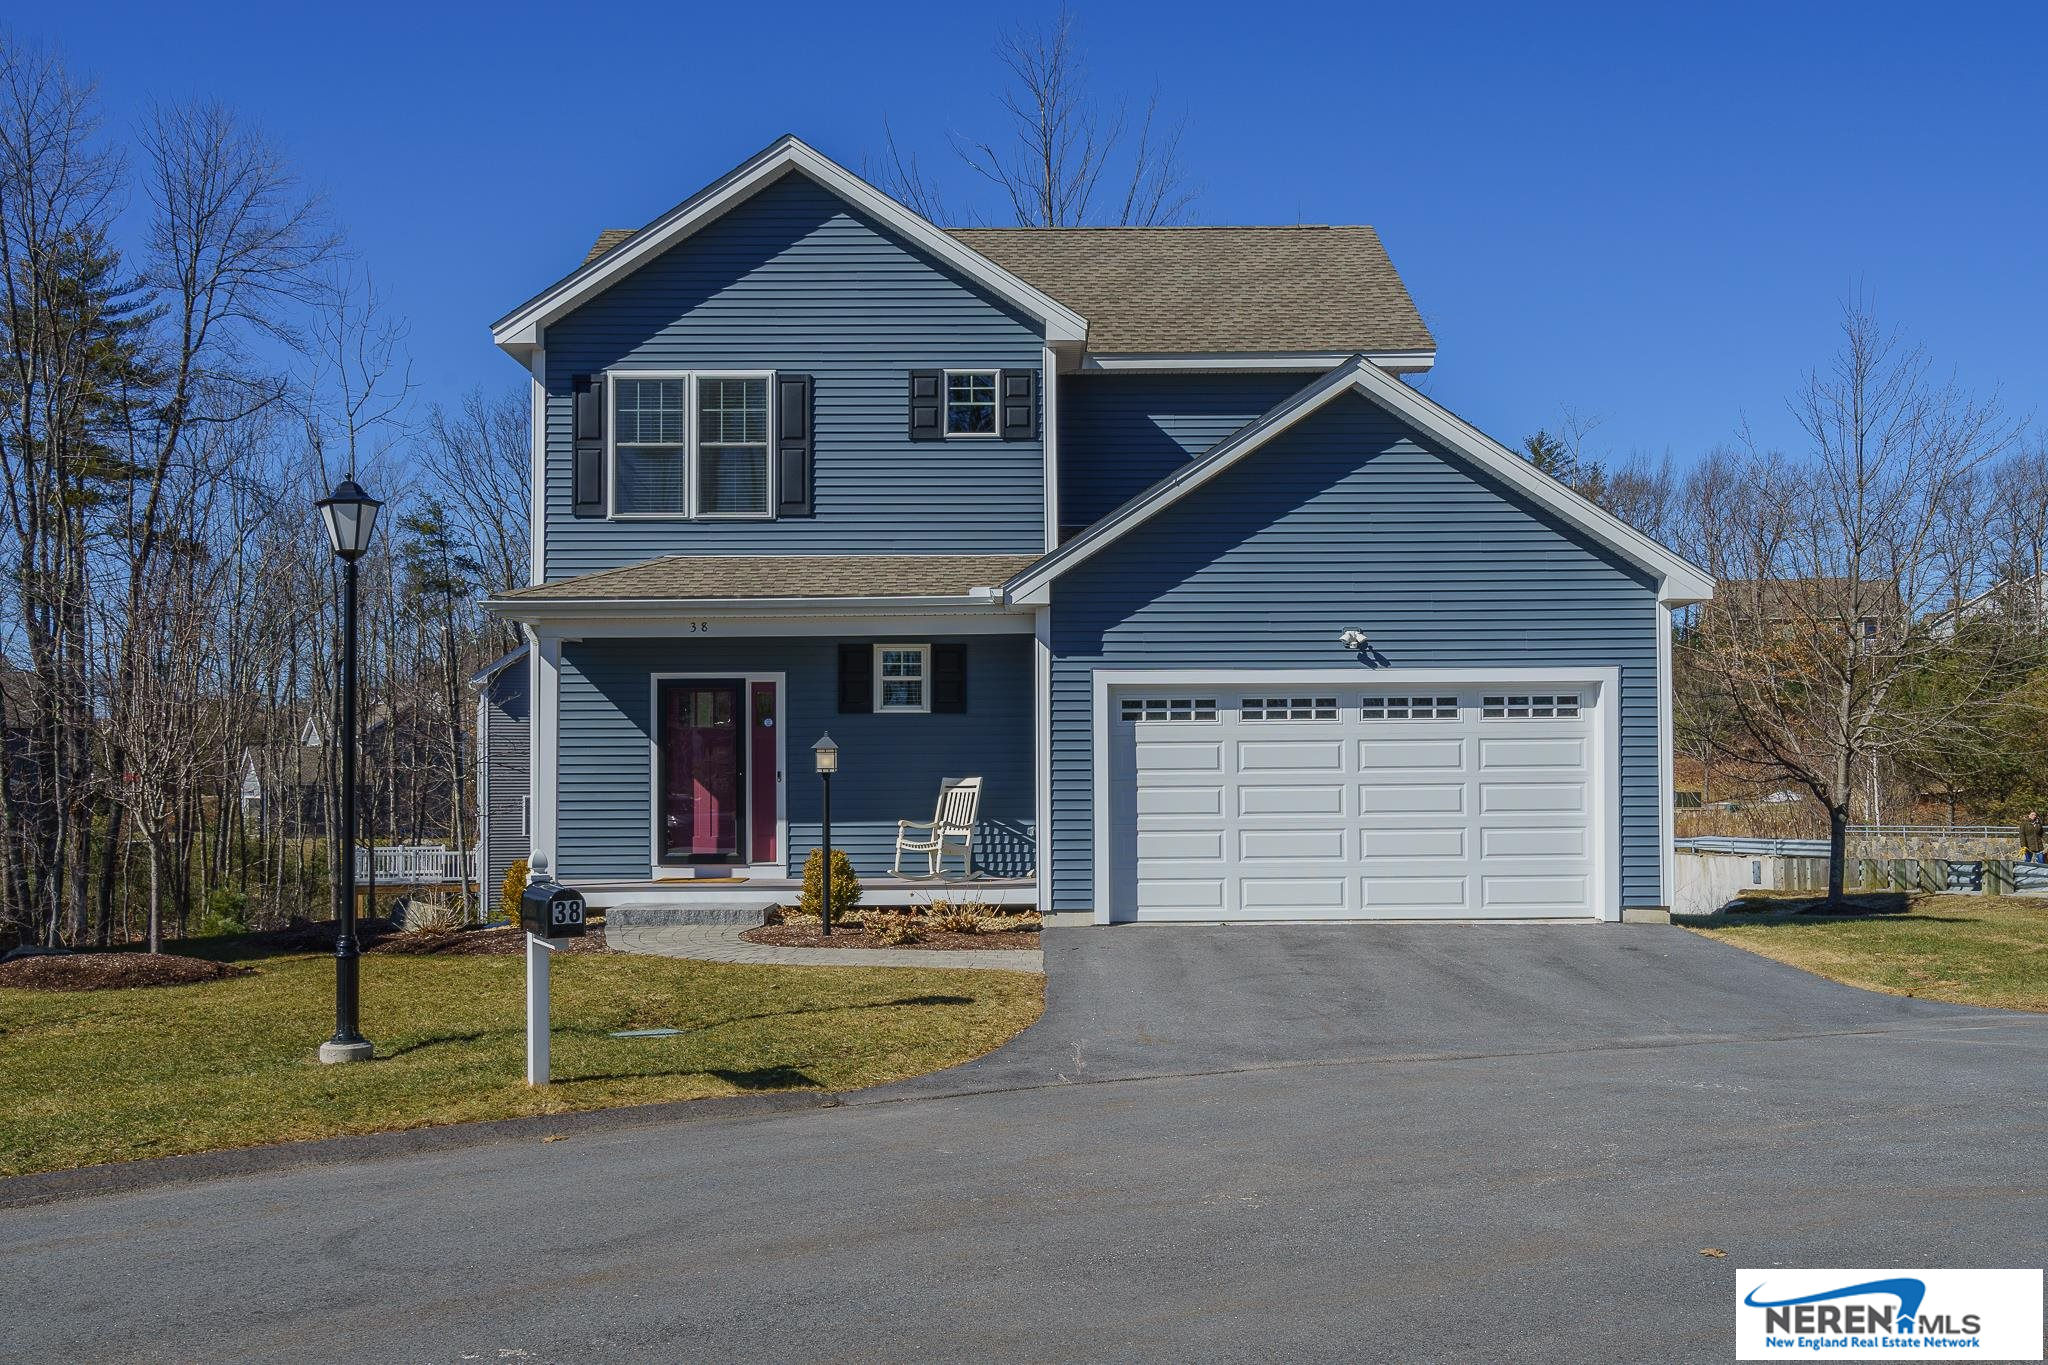 38 Crosswood Way, Manchester, NH 03102